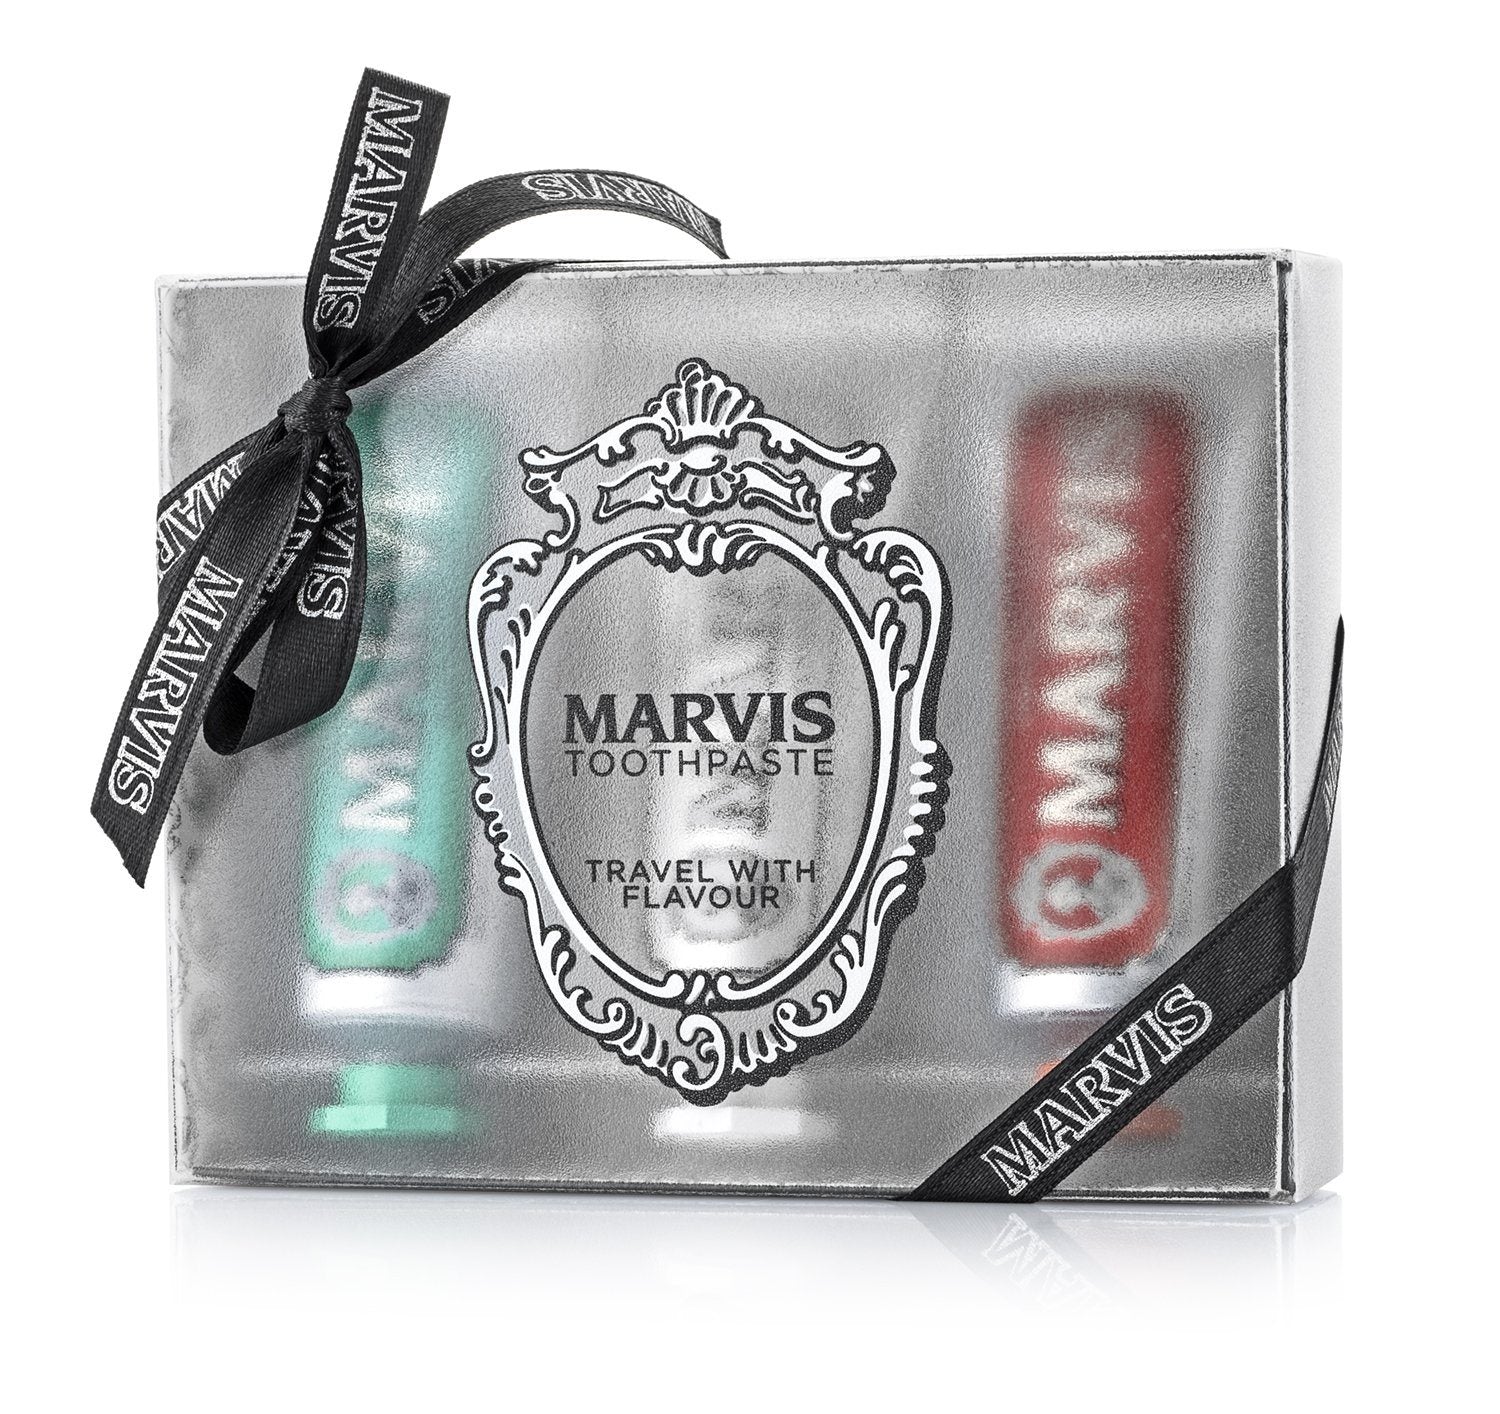 Marvis Toothpaste - Travel with Flavour Gift Set - 3 Pack - Soap & Water Everyday